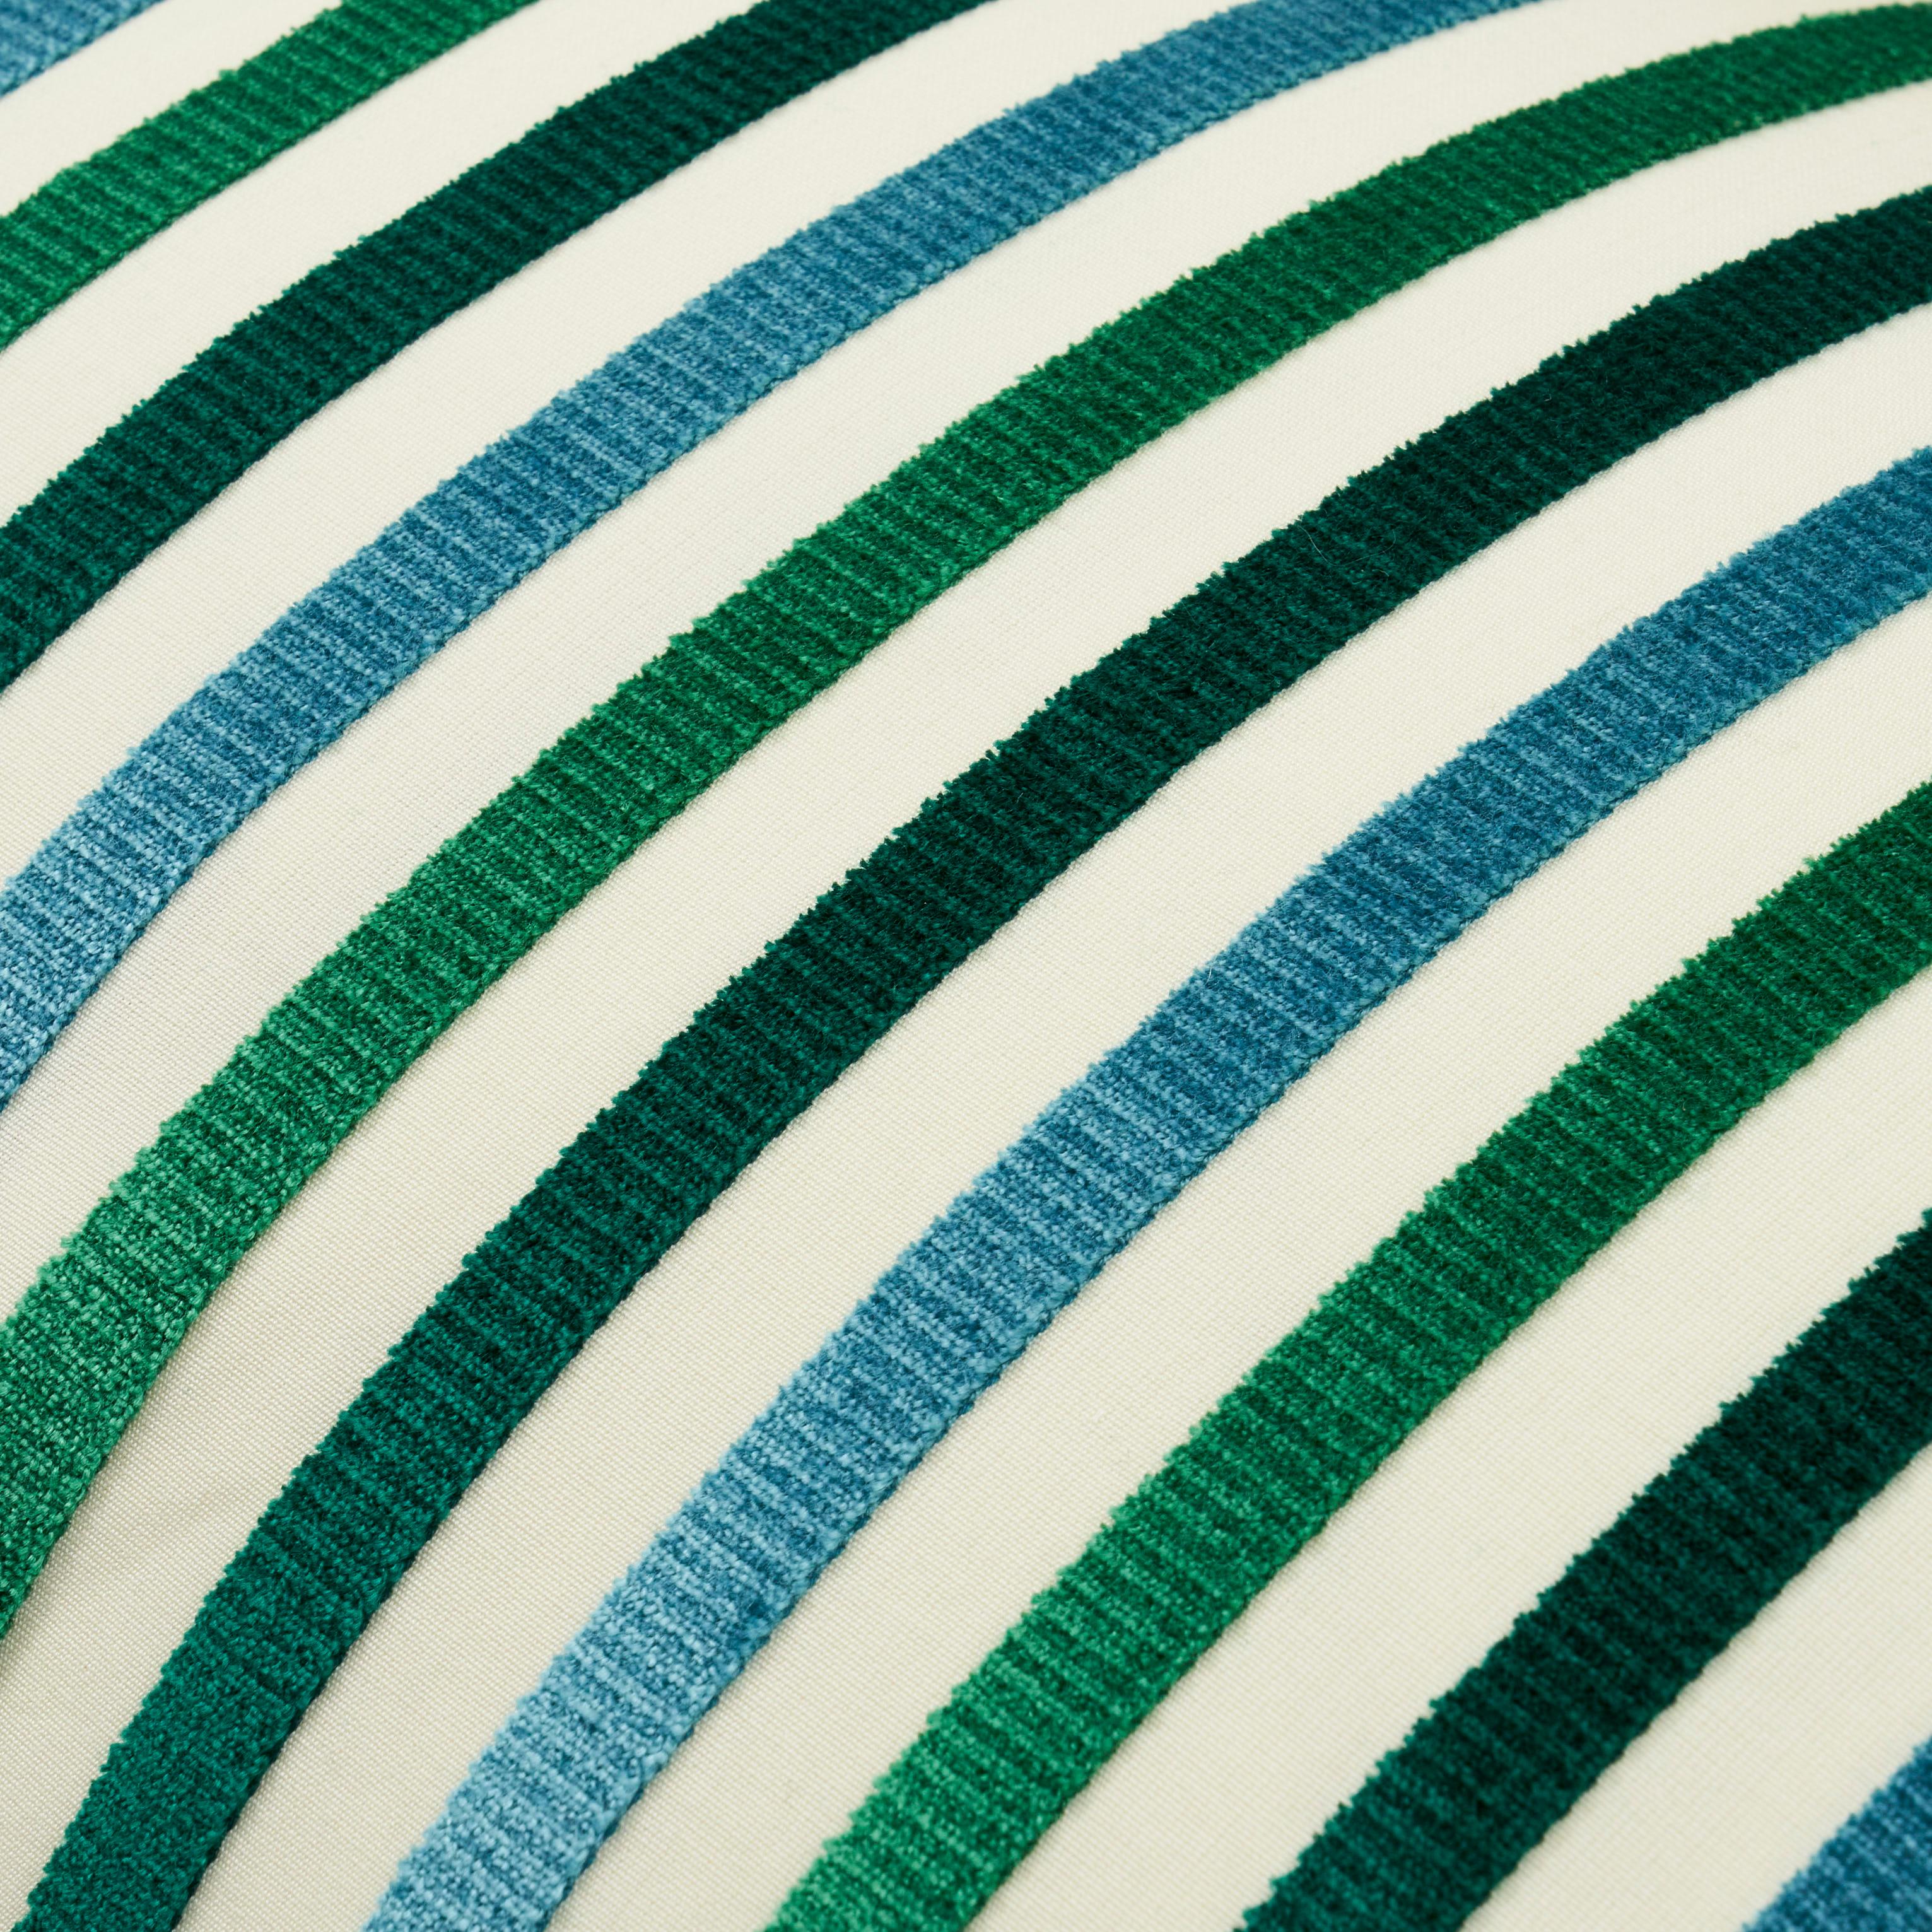 This pillow features Le Matelot with a knife edge finish. Cut velvet stripes pop on a crisp cotton ground, making this uniquely scaled and tonal pattern the epitome of chic. Pillow includes a feather/down fill insert and hidden zipper closure.  